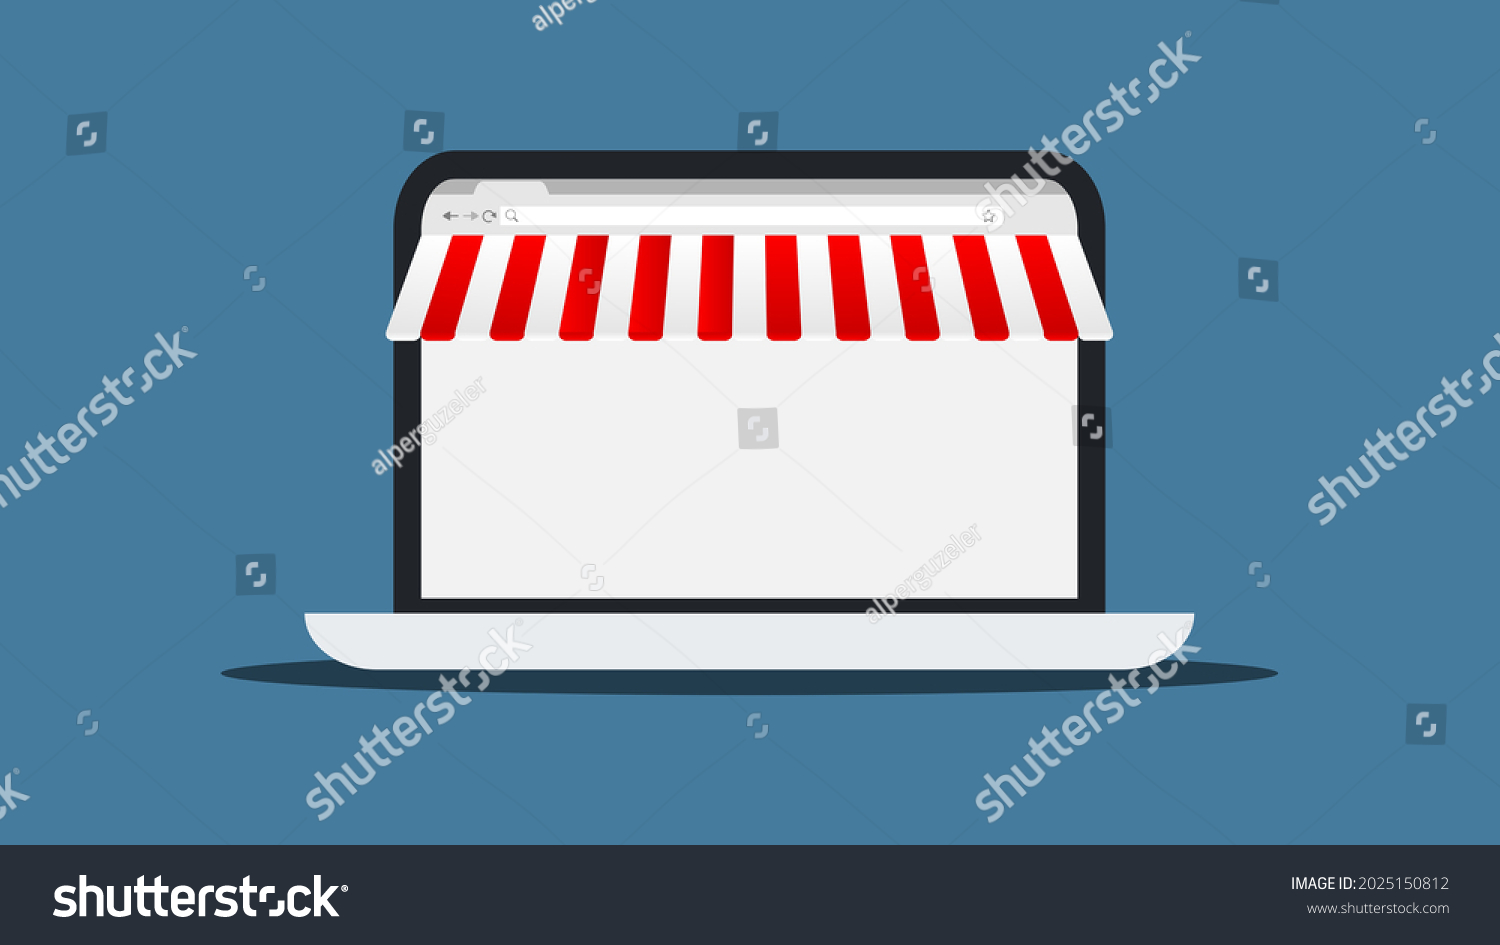 SVG of Online shopping on internet bowser, internet browser with search bar, red and white striped sunshade. Laptop with empty white screen. svg